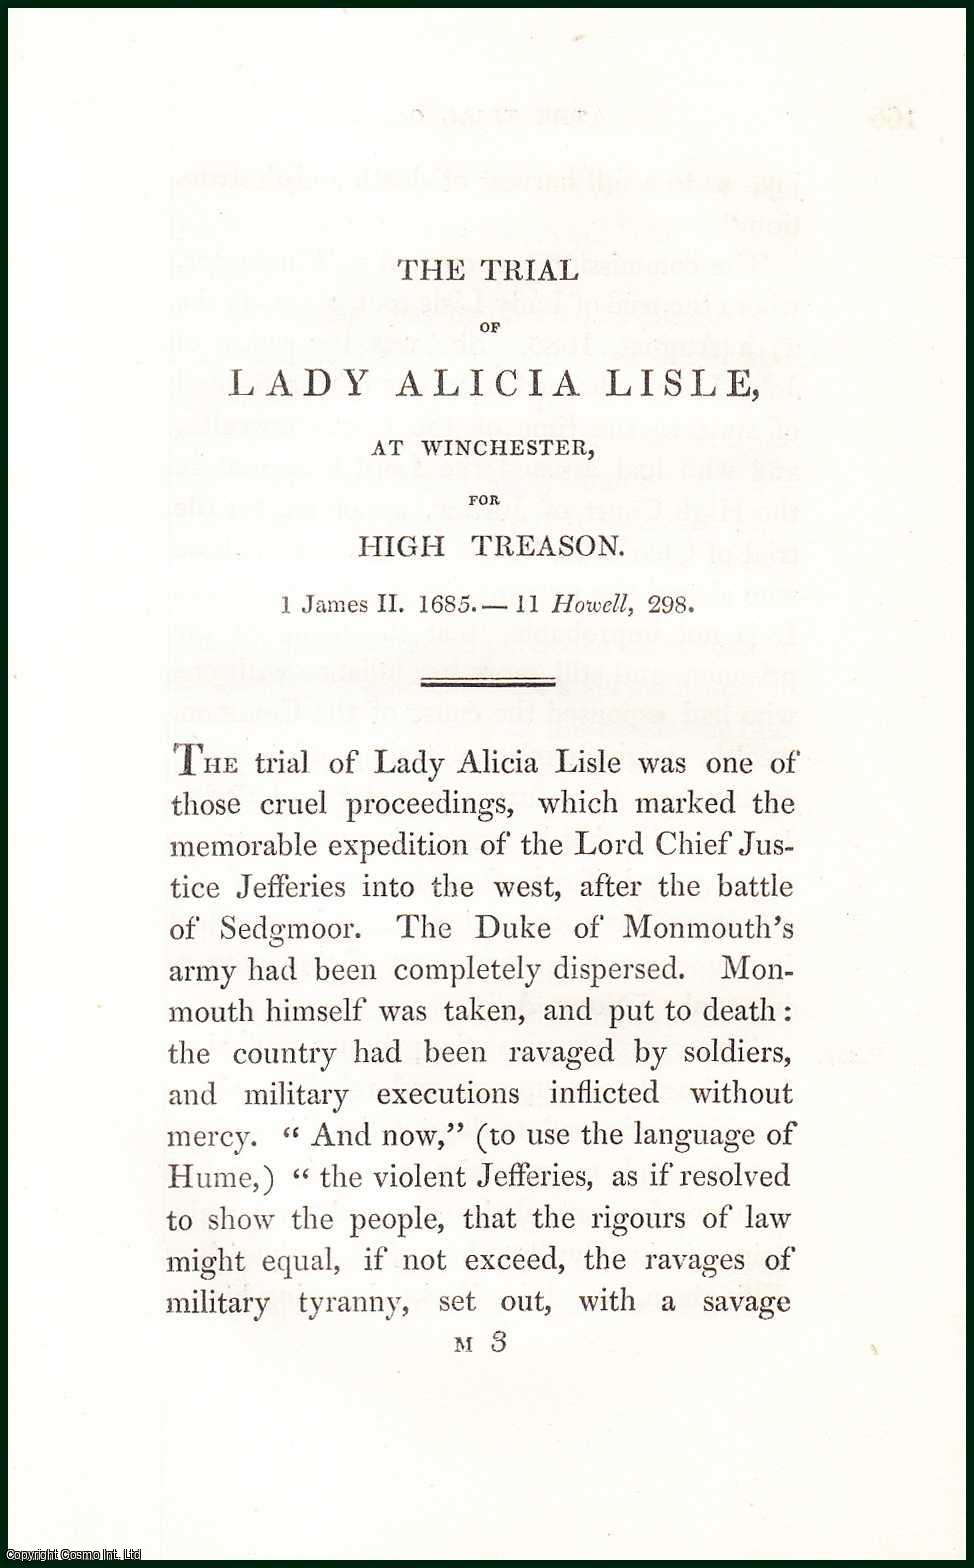 [Trial] - The Trial of Lady Alicia Lisle, at Winchester, for High Treason, 1685. An uncommon original article from the Collected State Trials, 1826.